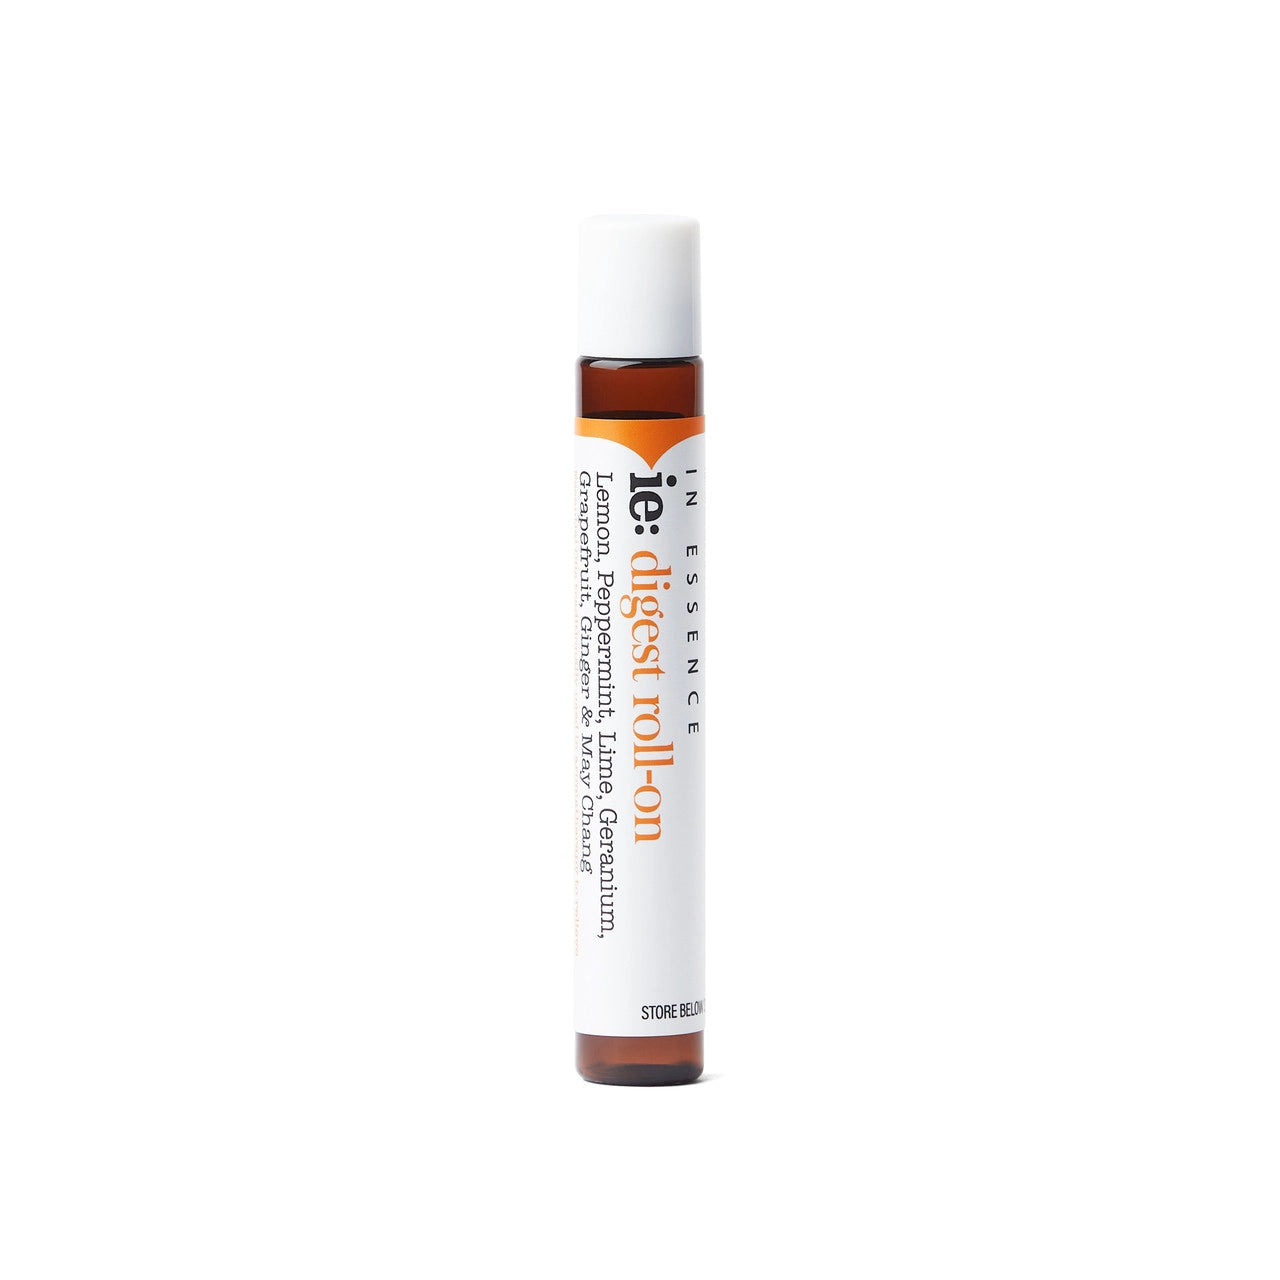 In Essence Essential Oil Roll-On ie: Digest Aid Roll-On 10ml